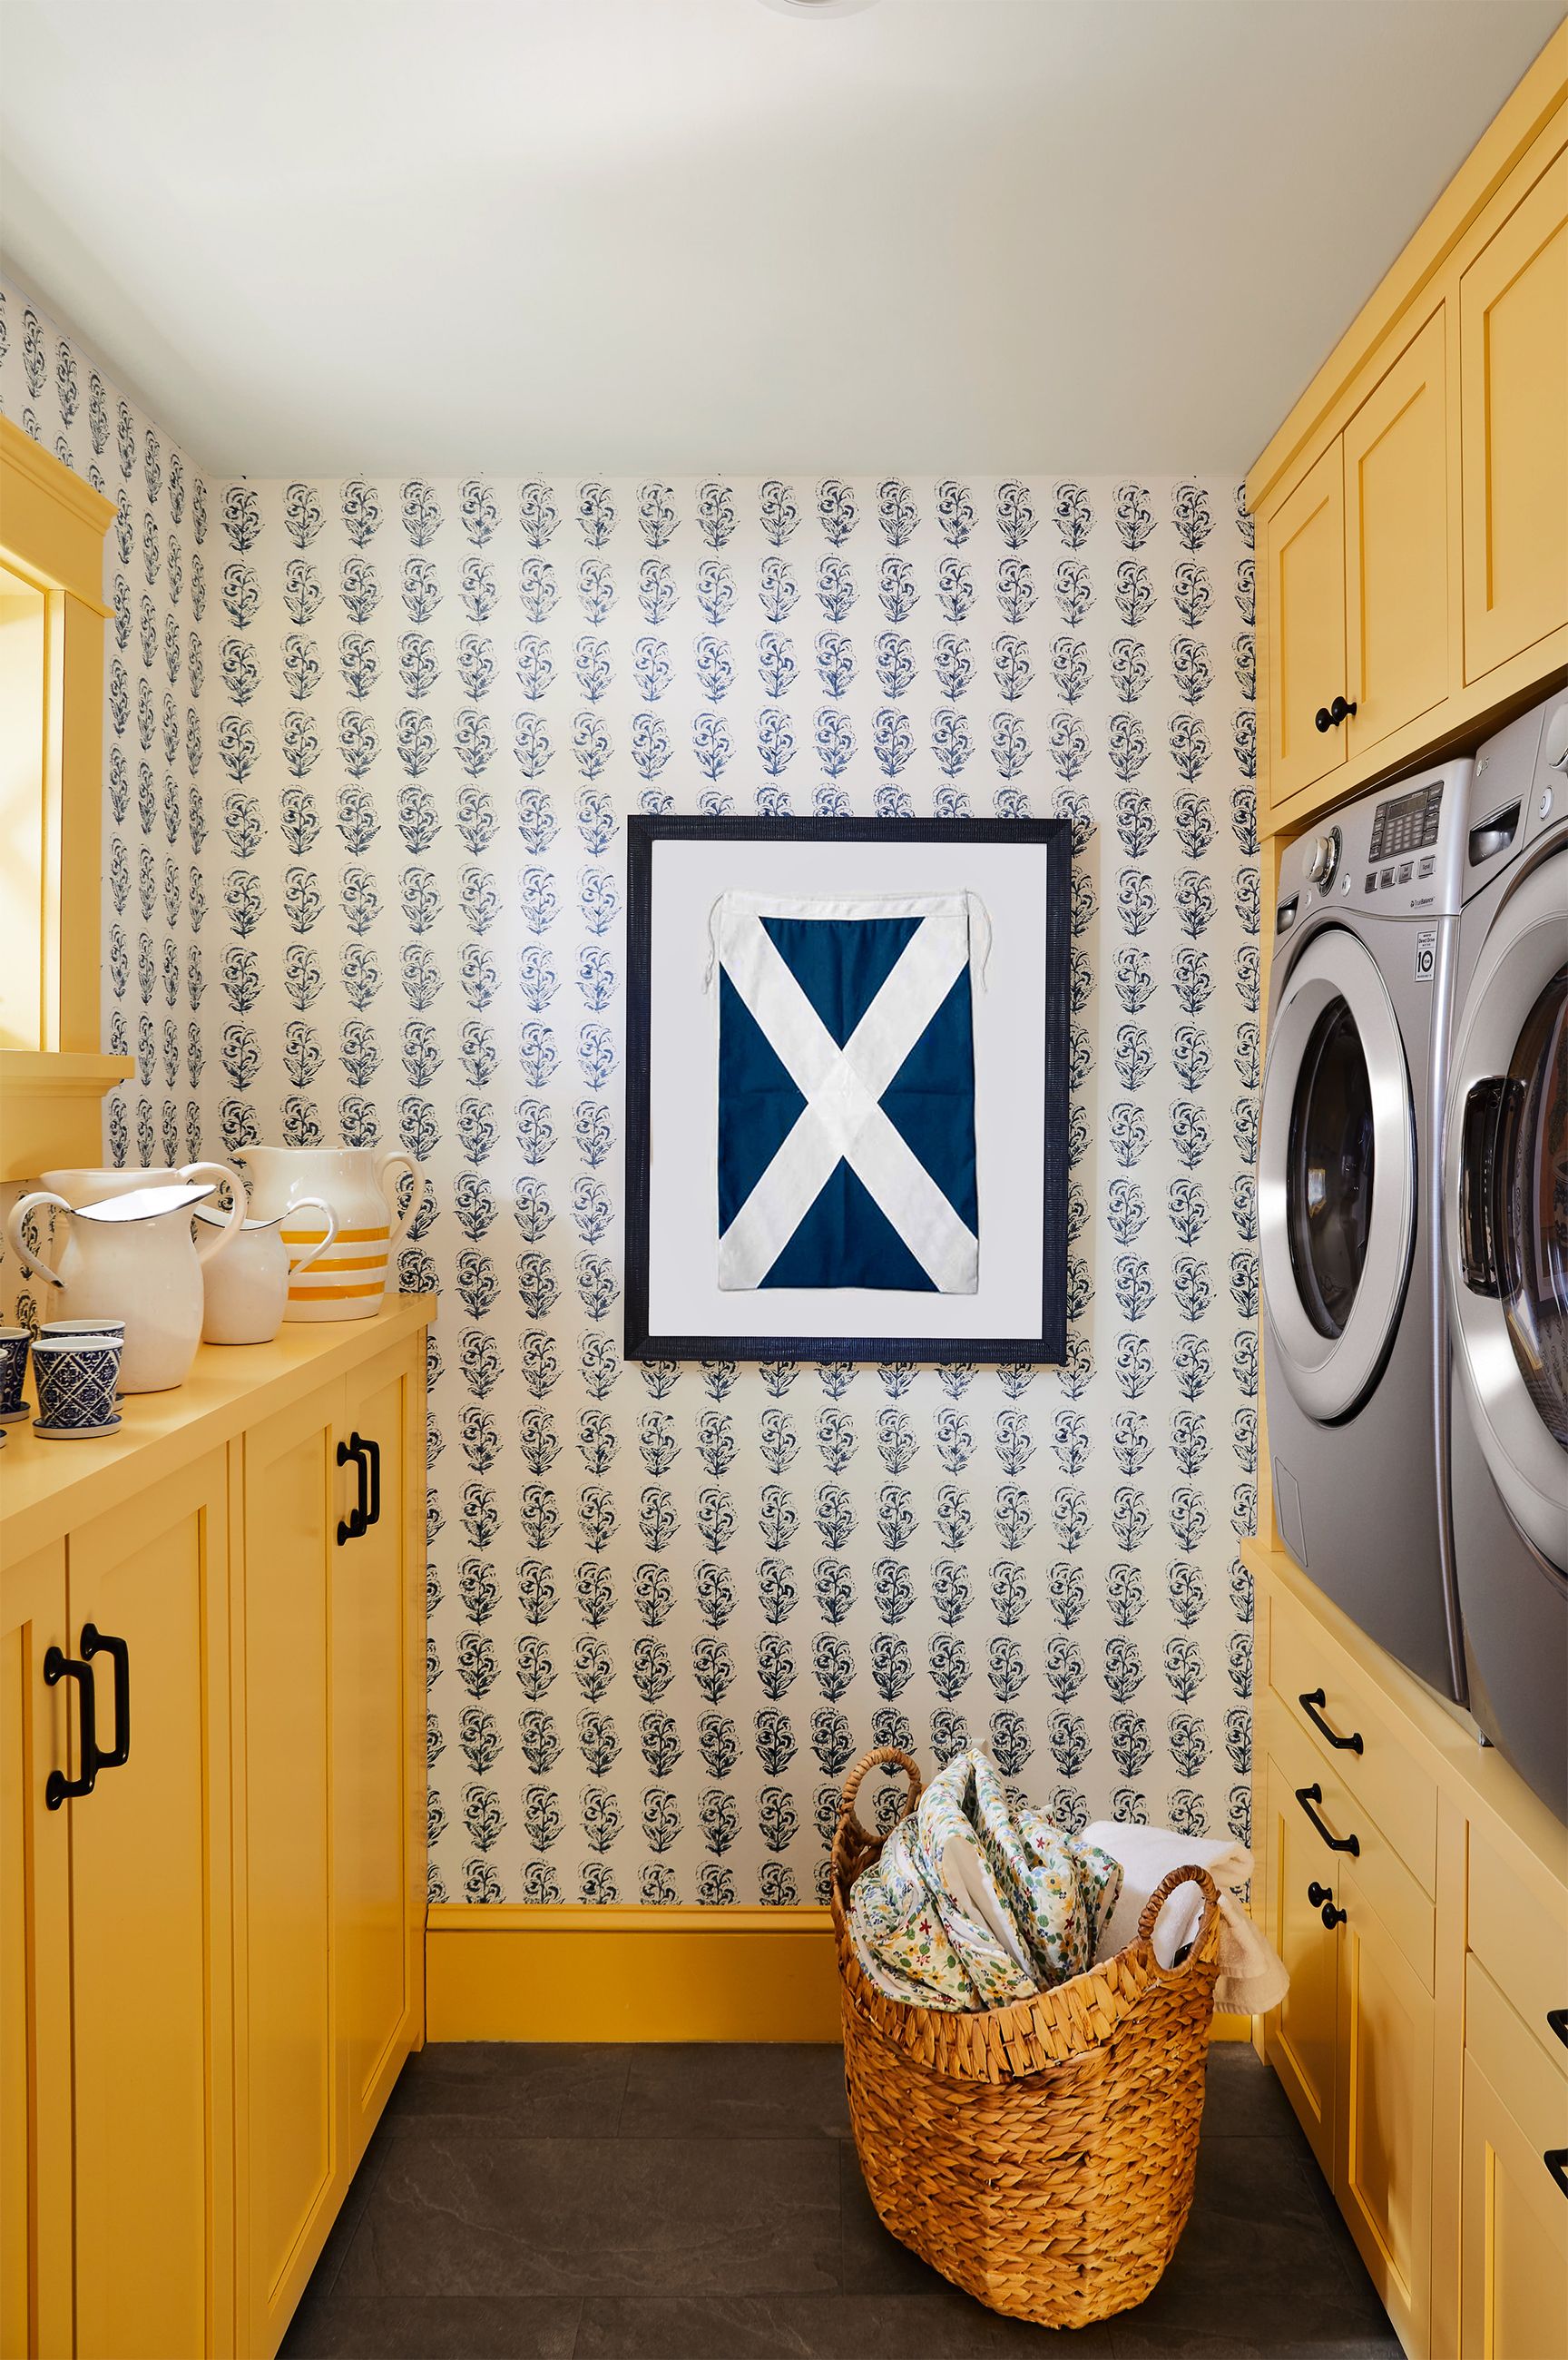 Aggregate 72+ fun laundry room wallpaper best - in.cdgdbentre